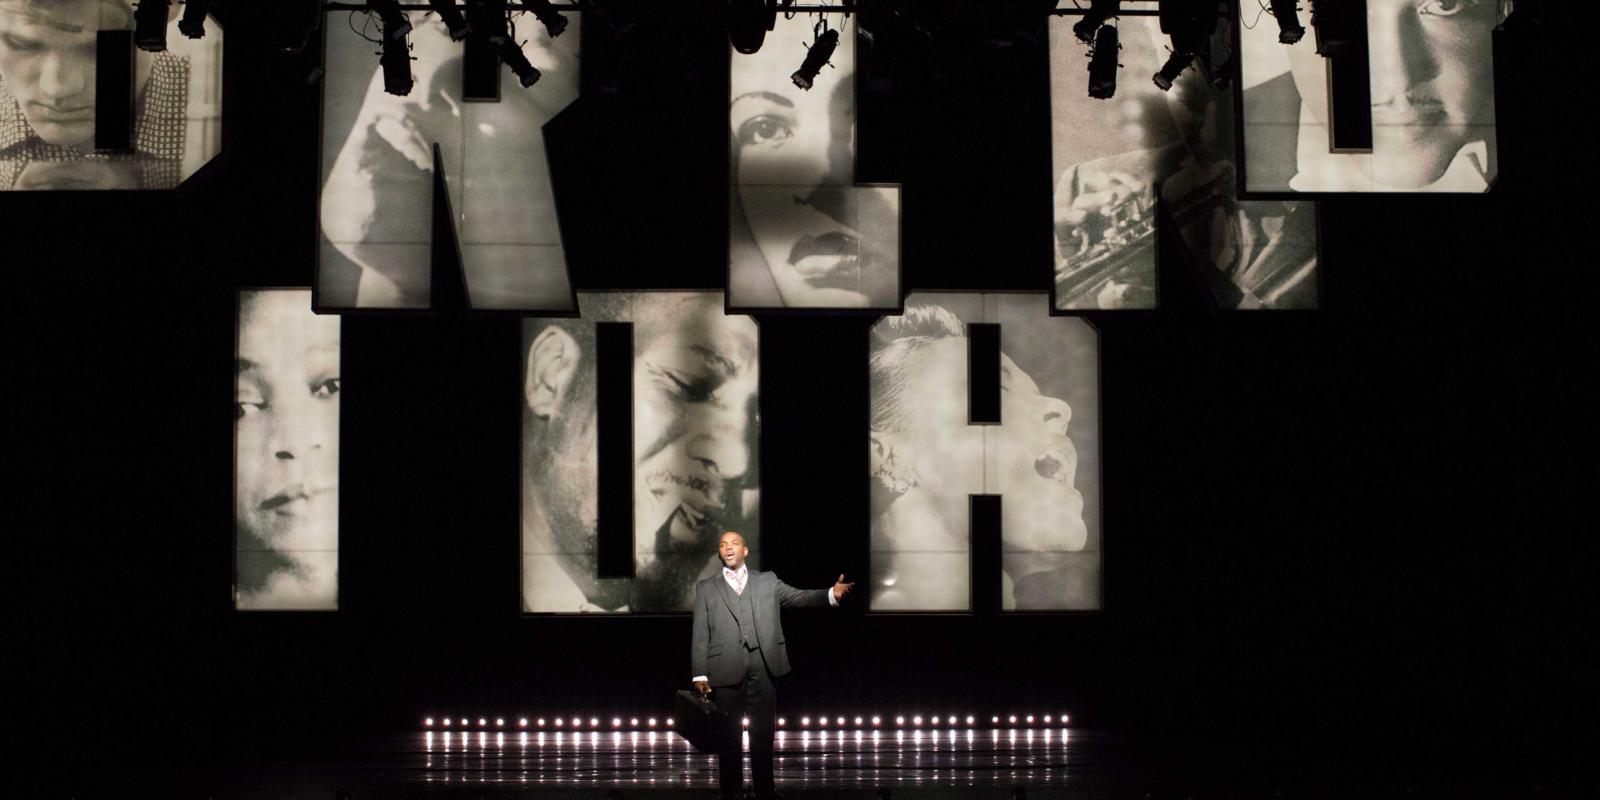 a man singing with black and white images projected behind